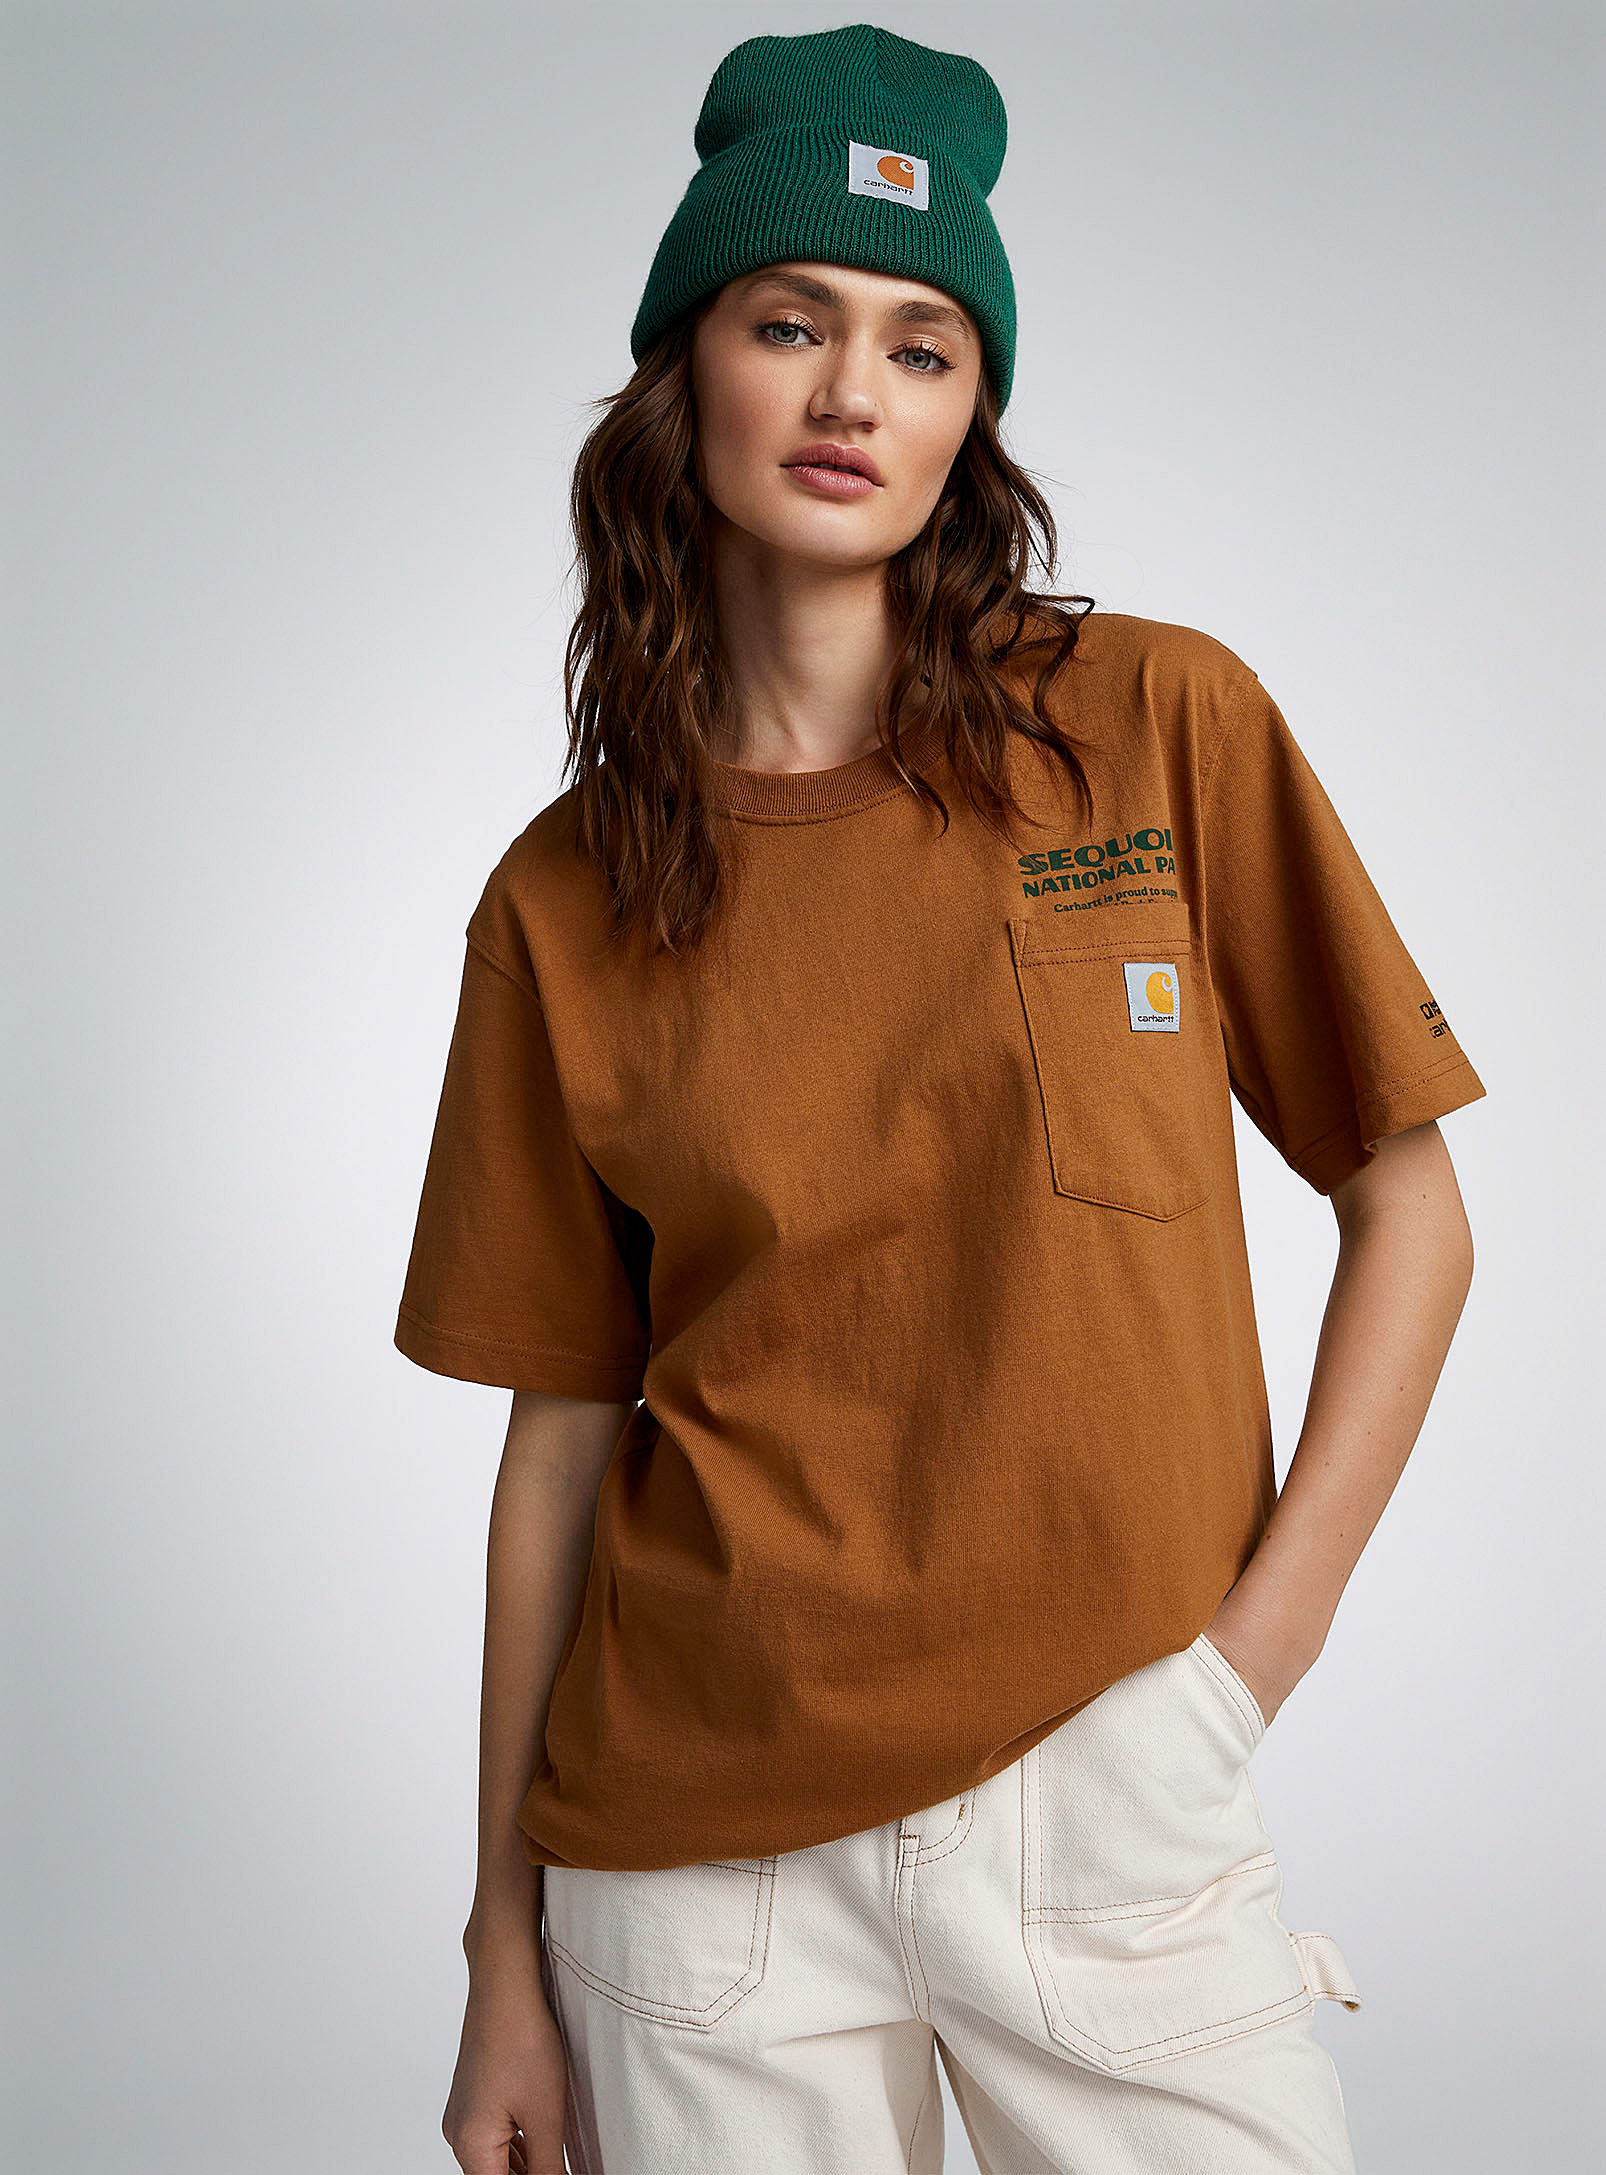 Carhartt Sequoia National Park T-shirt In Brown